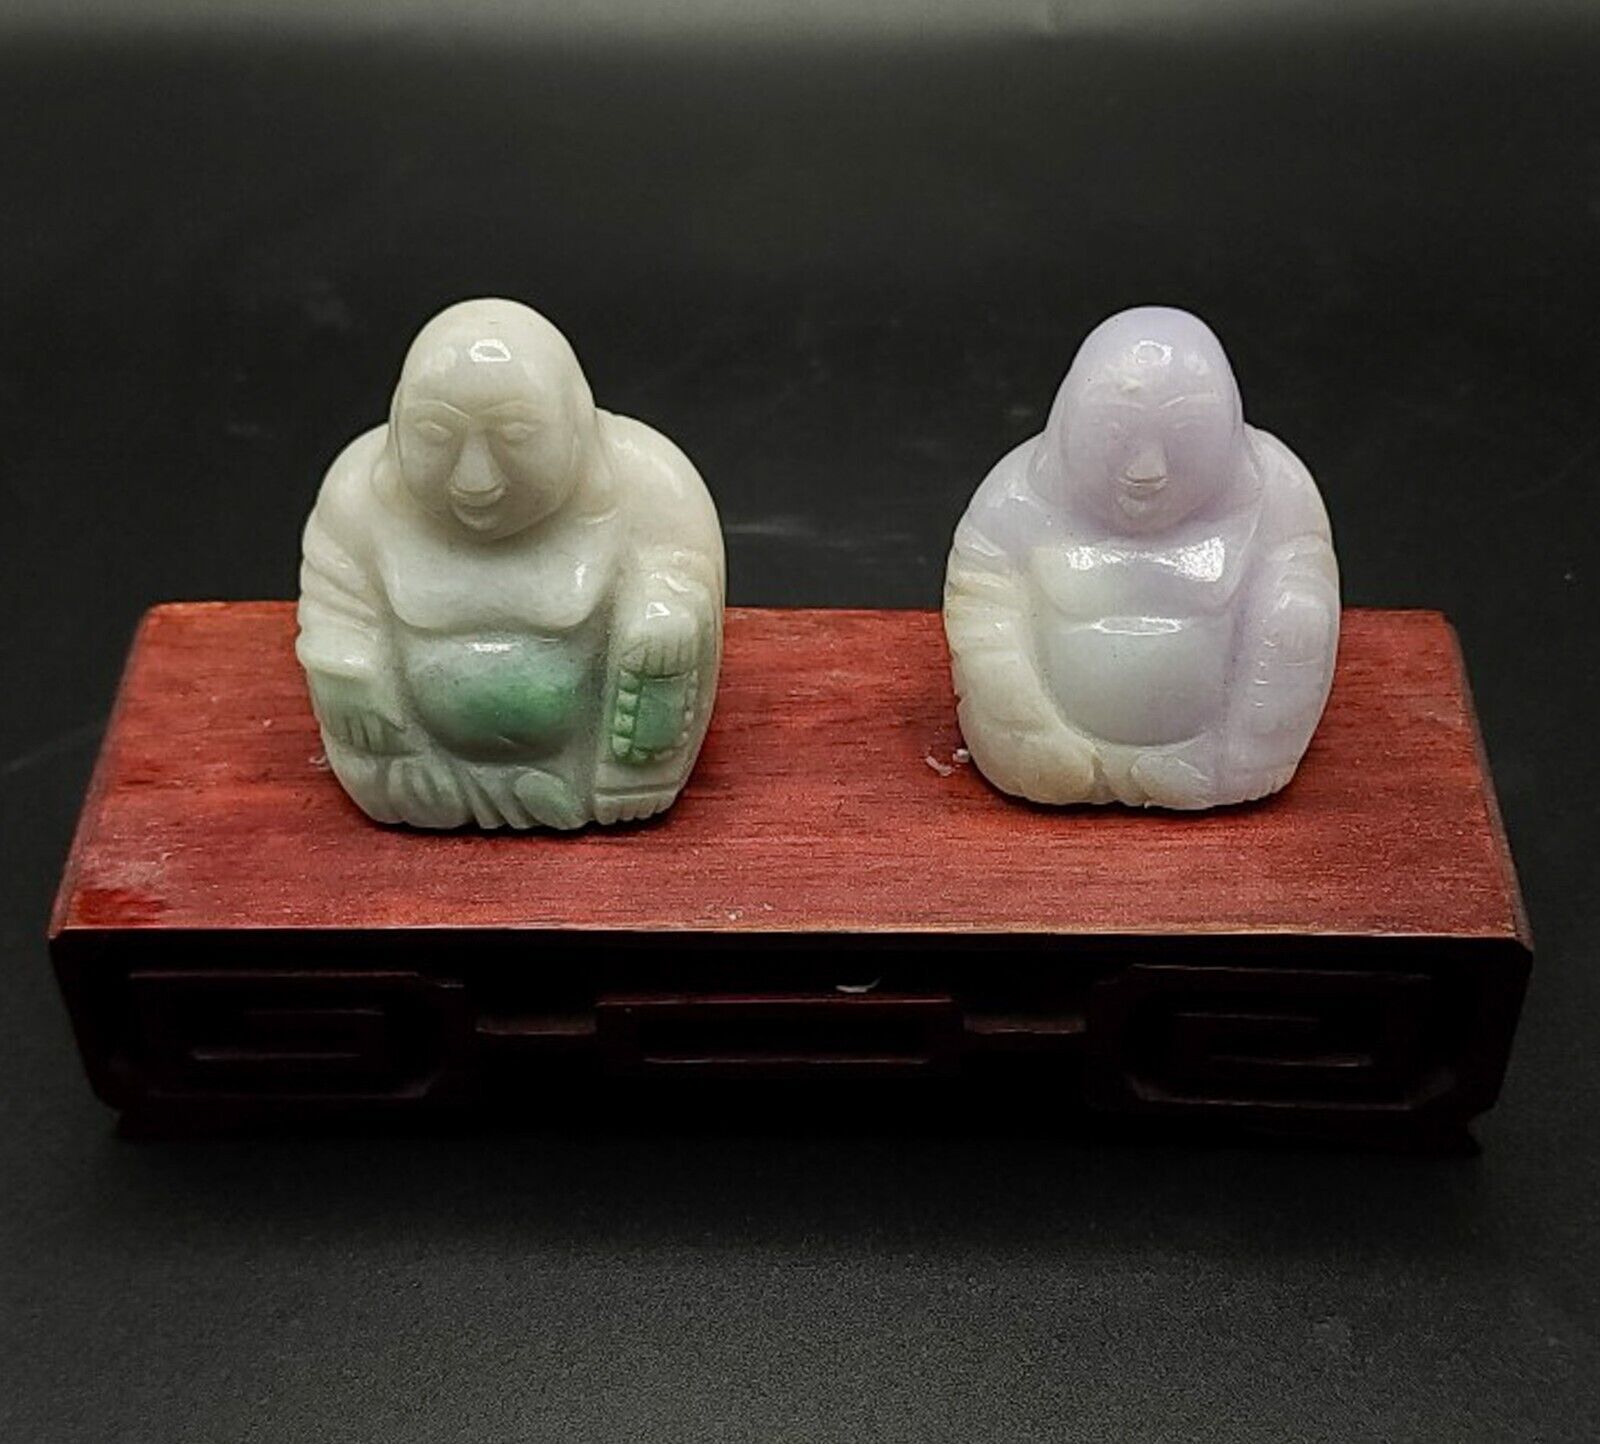 Pair of Late Qing Jade Buddhas (Green & Lavender) on Rosewood Stand 19th C